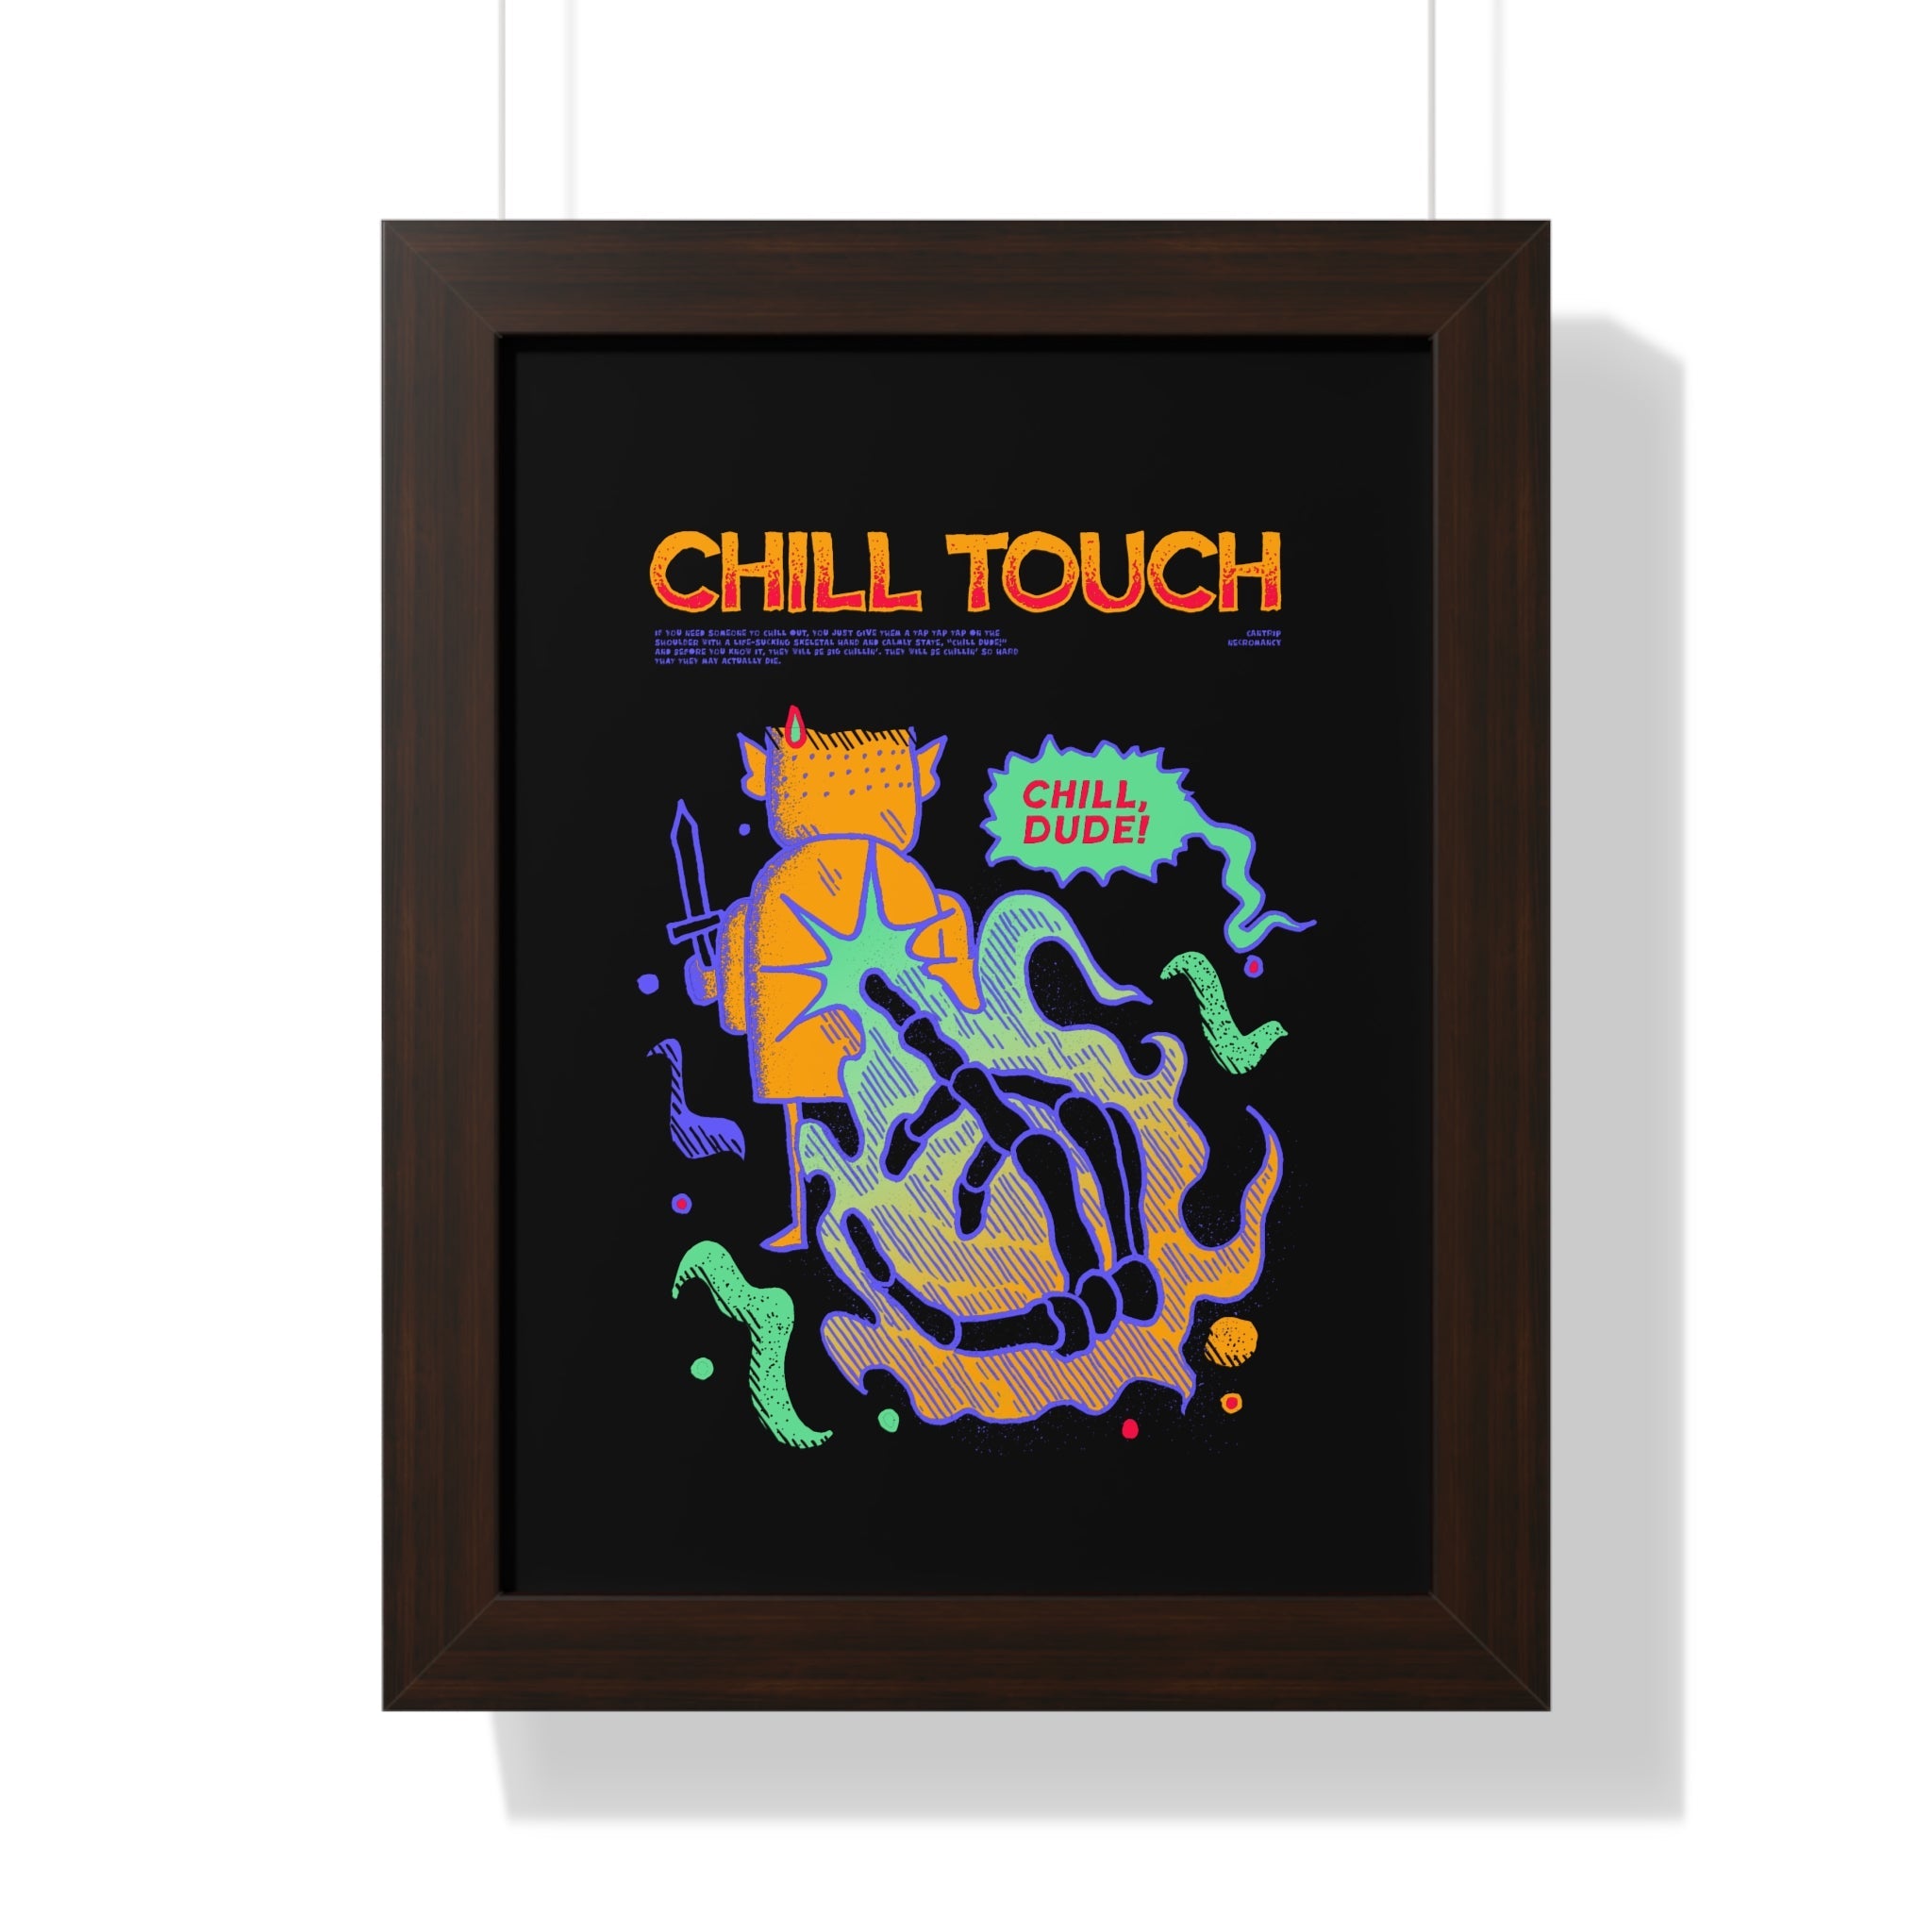 Chill Touch | Framed Poster - Framed Poster - Ace of Gnomes - 11546837561984600903